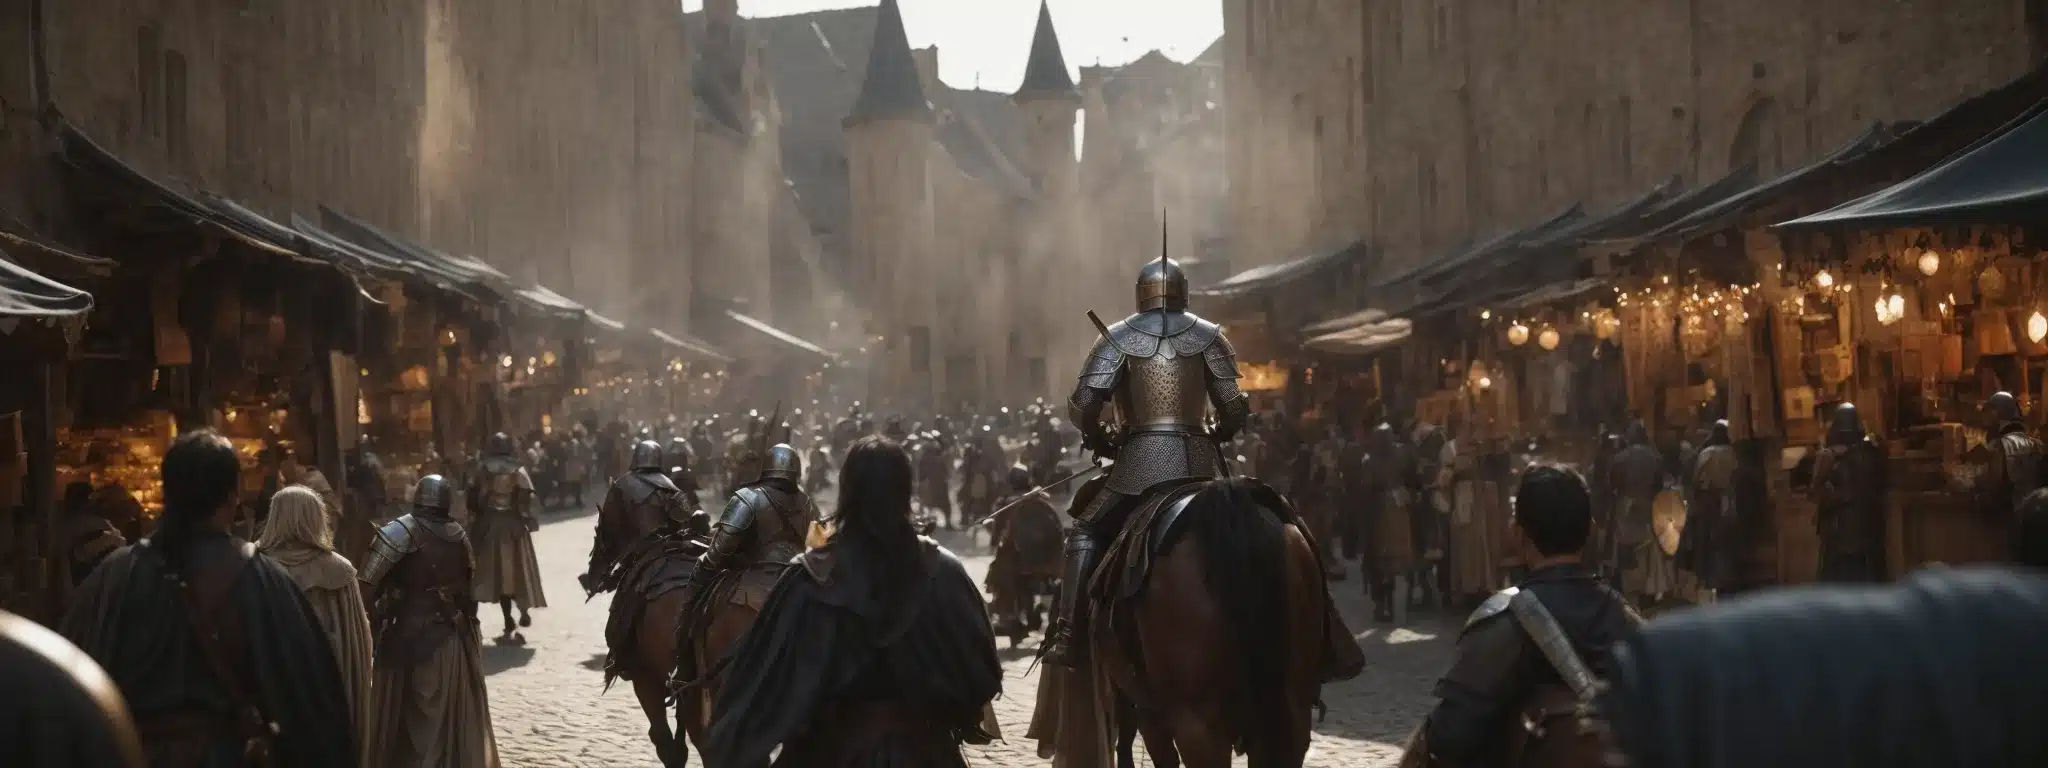 A Knight Galloping Through A Bustling Medieval Marketplace, Wielding A Radiant Sword High Above His Head.